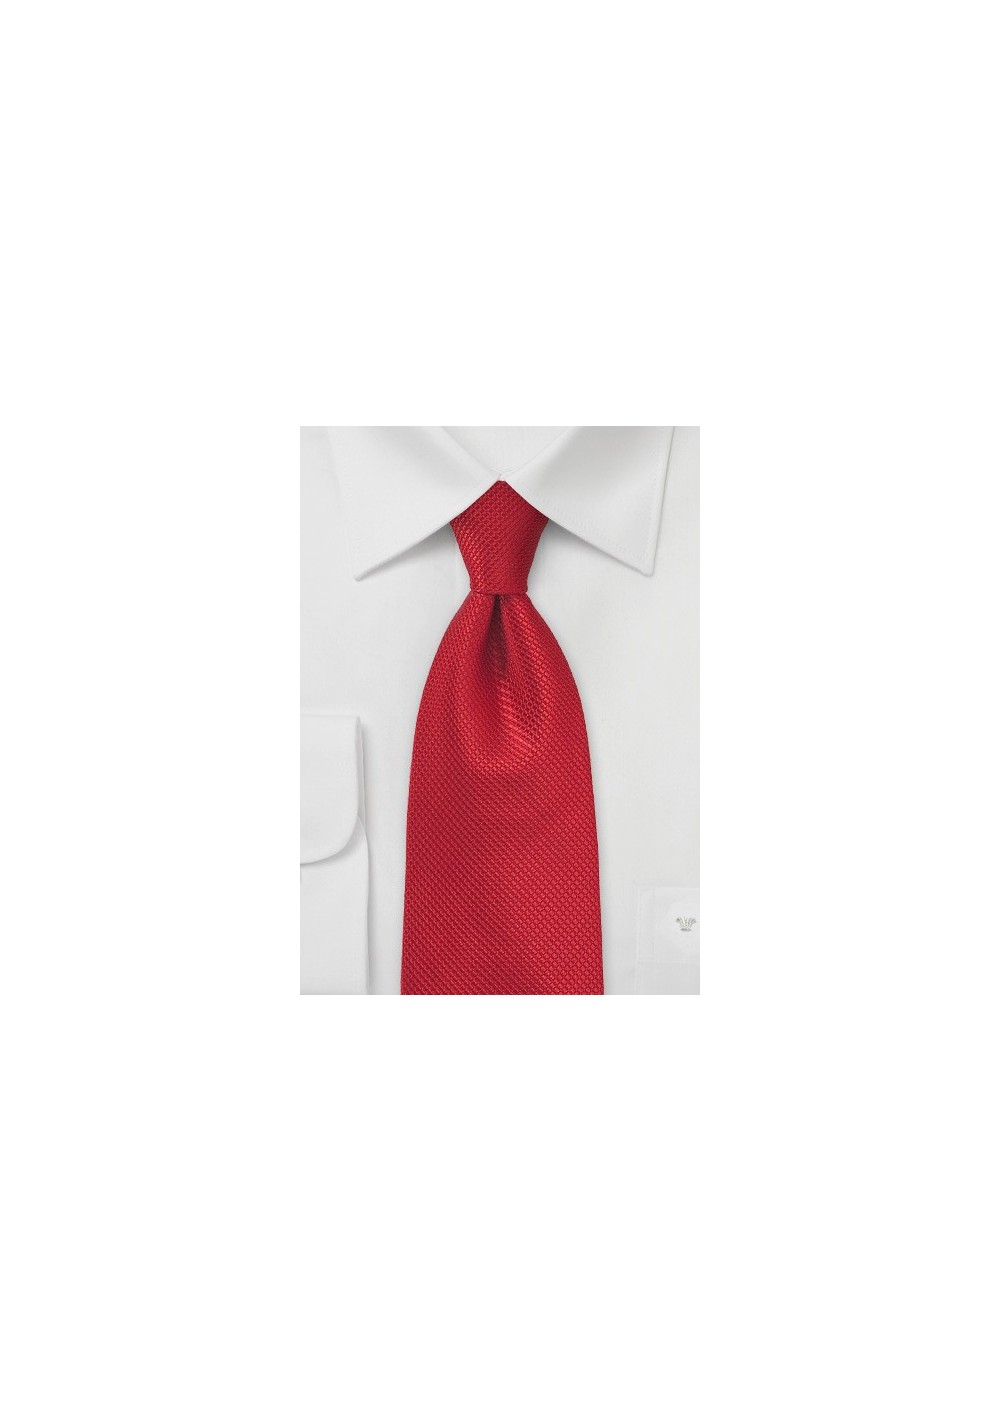 Solid Cherry Red Tie made of Pure Silk